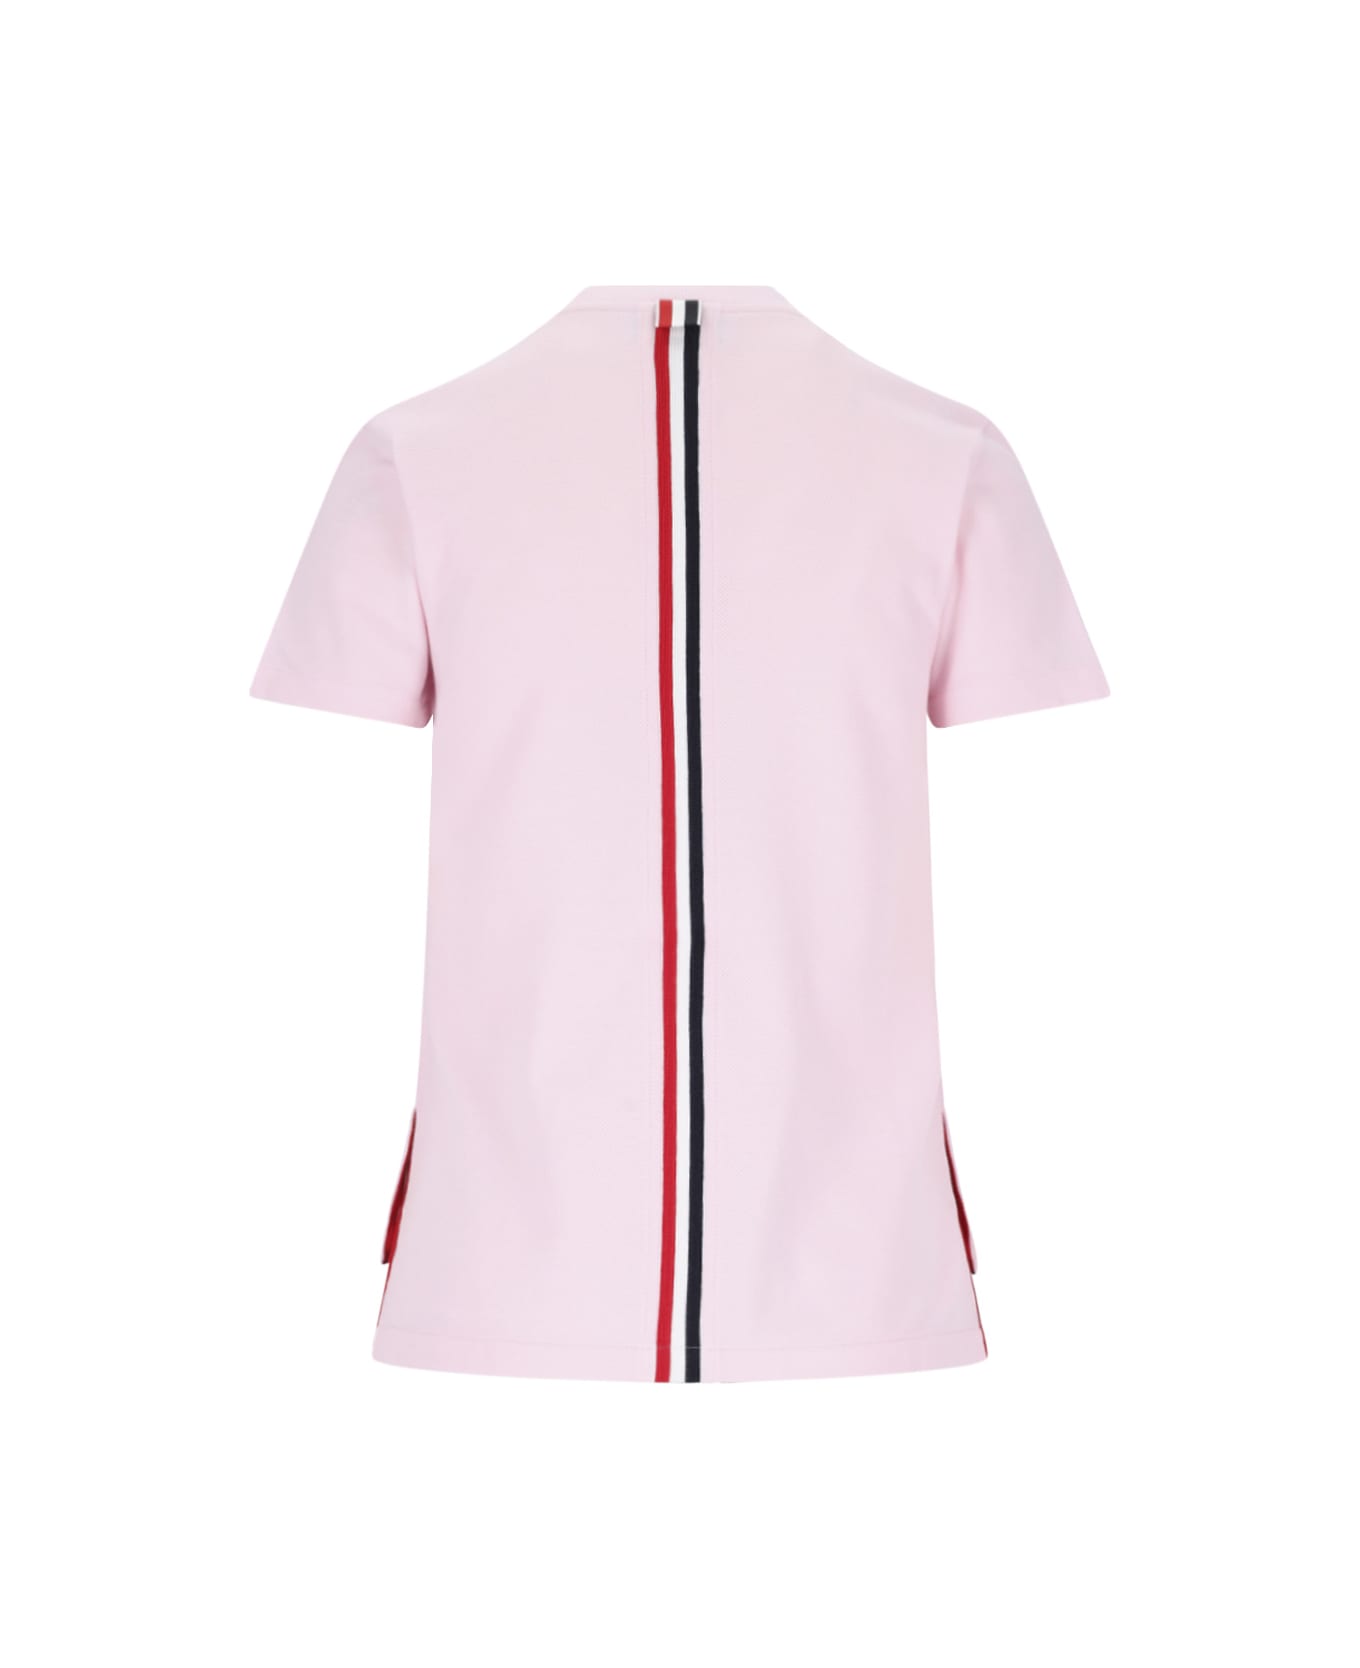 Thom Browne Tricolor Detail T-shirt On The Back - Pink